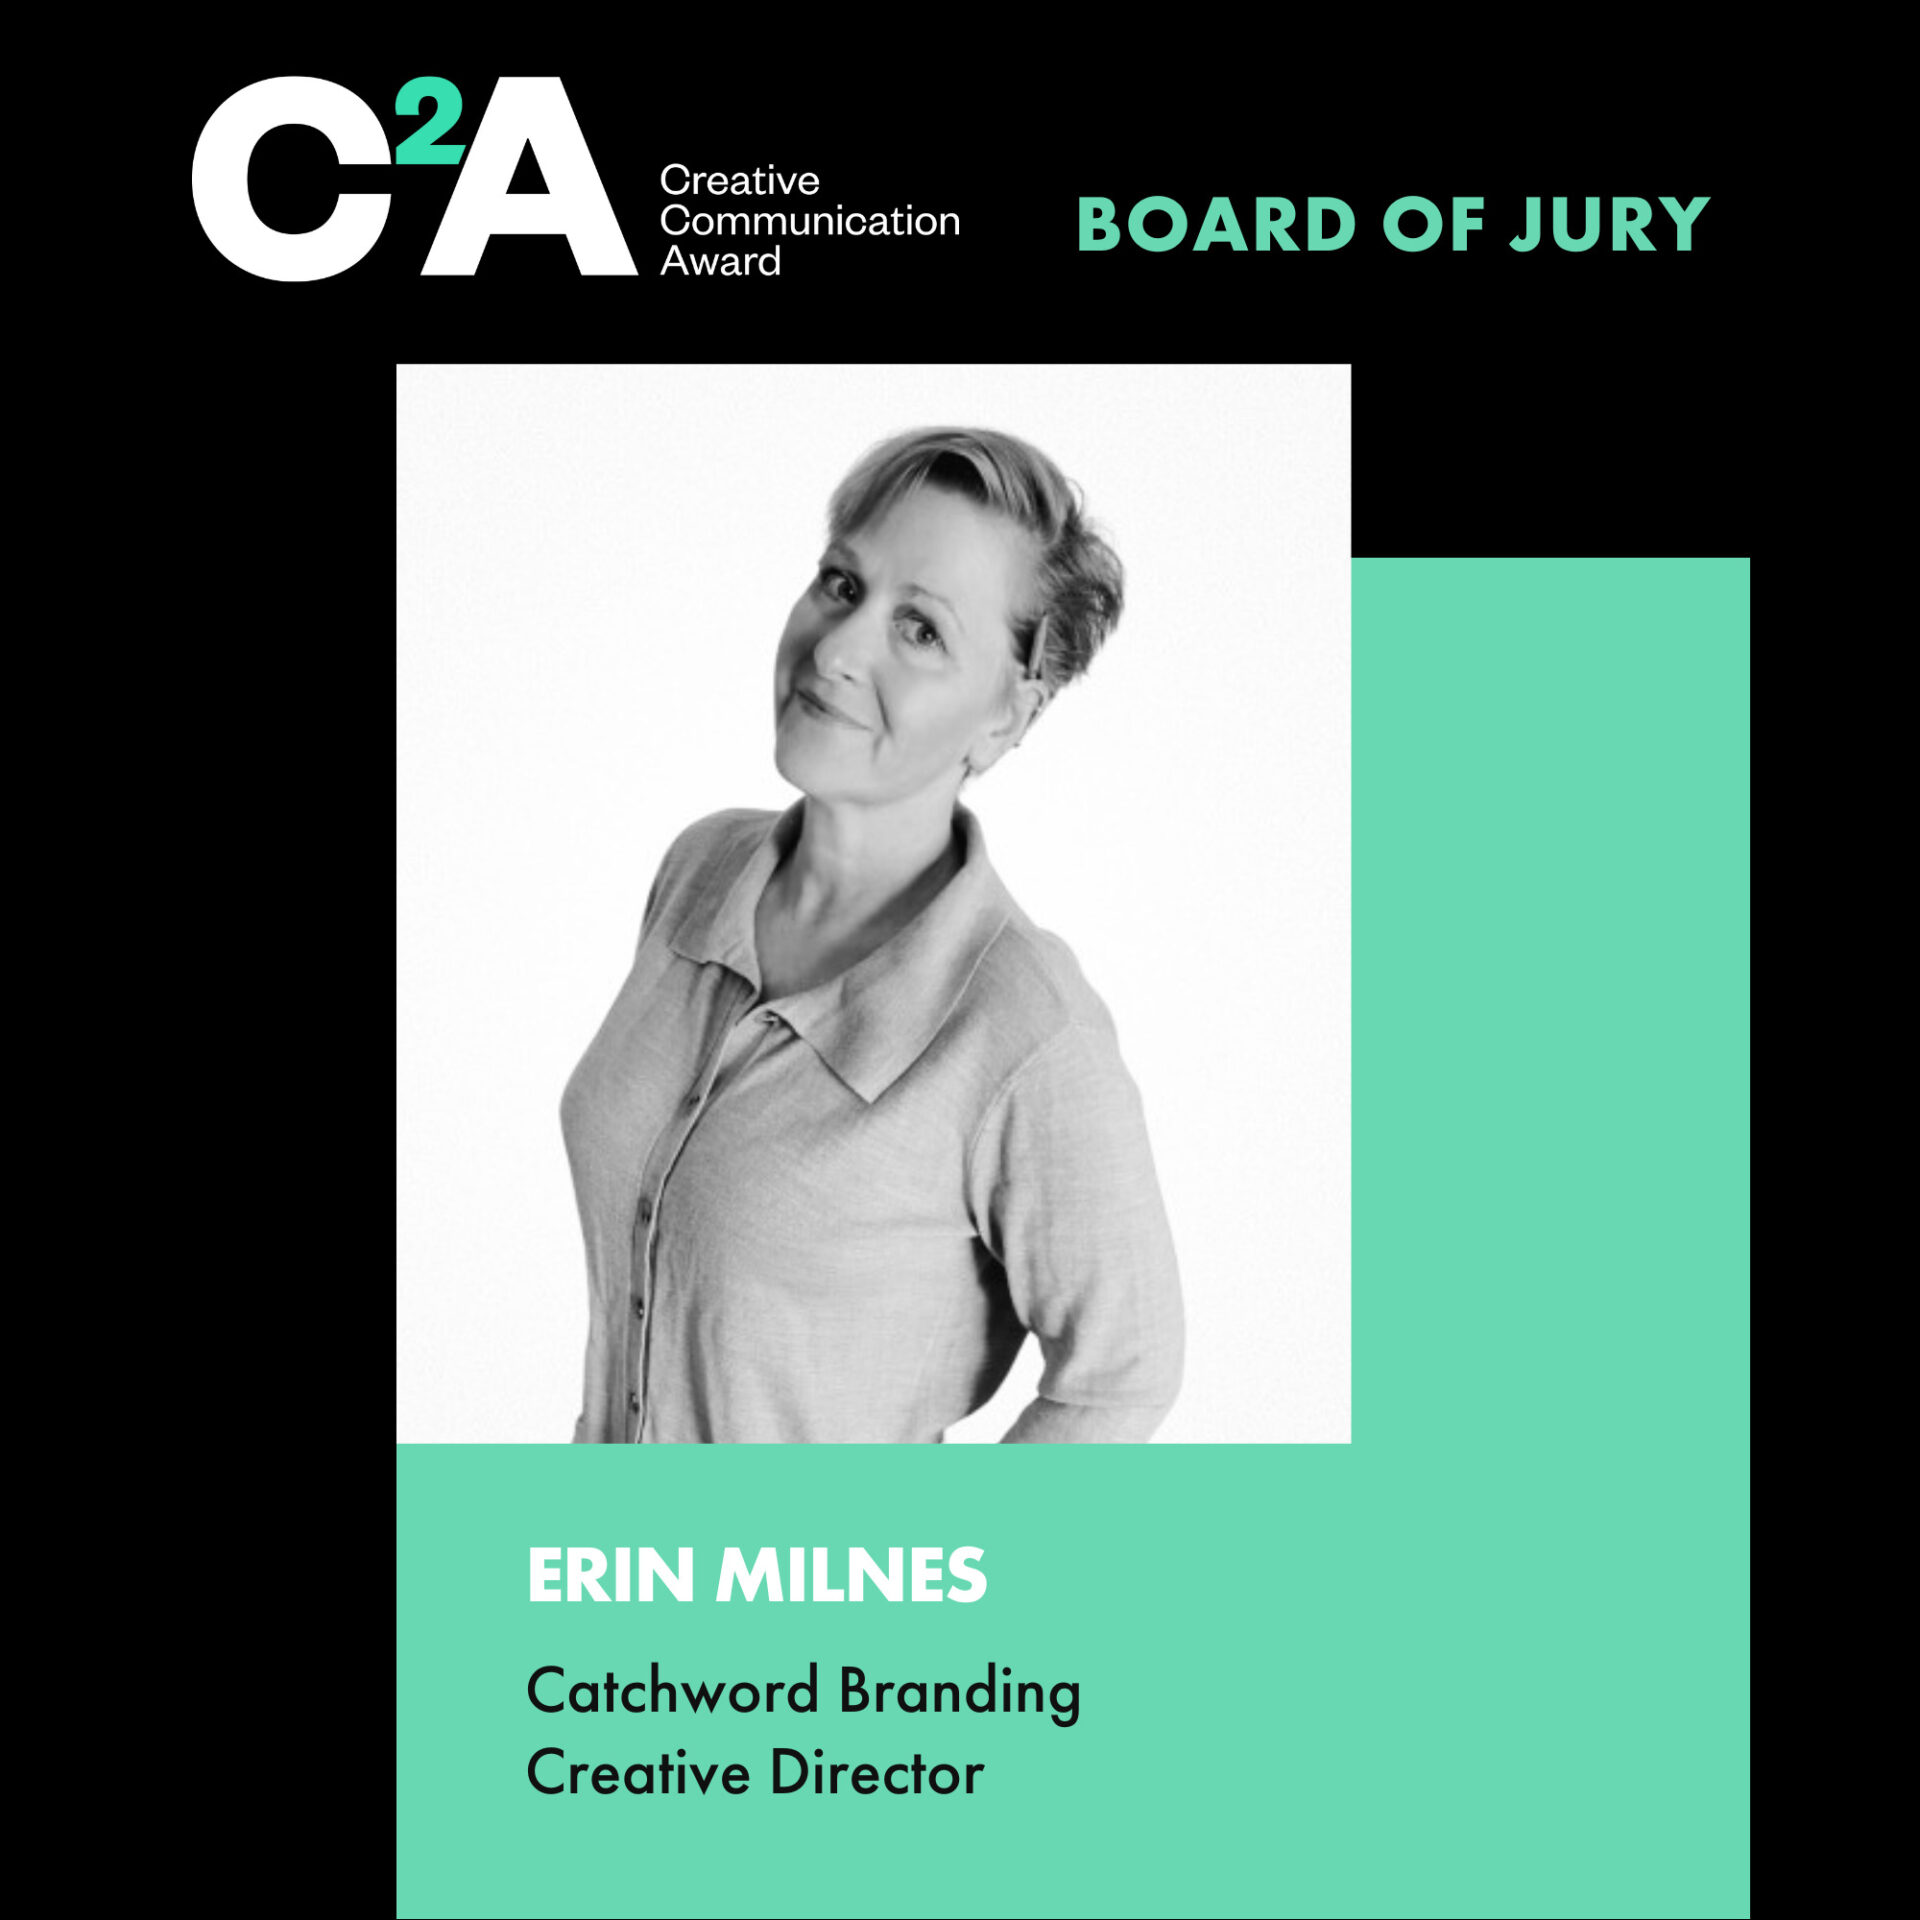 Catchword creative director joins C2A jury